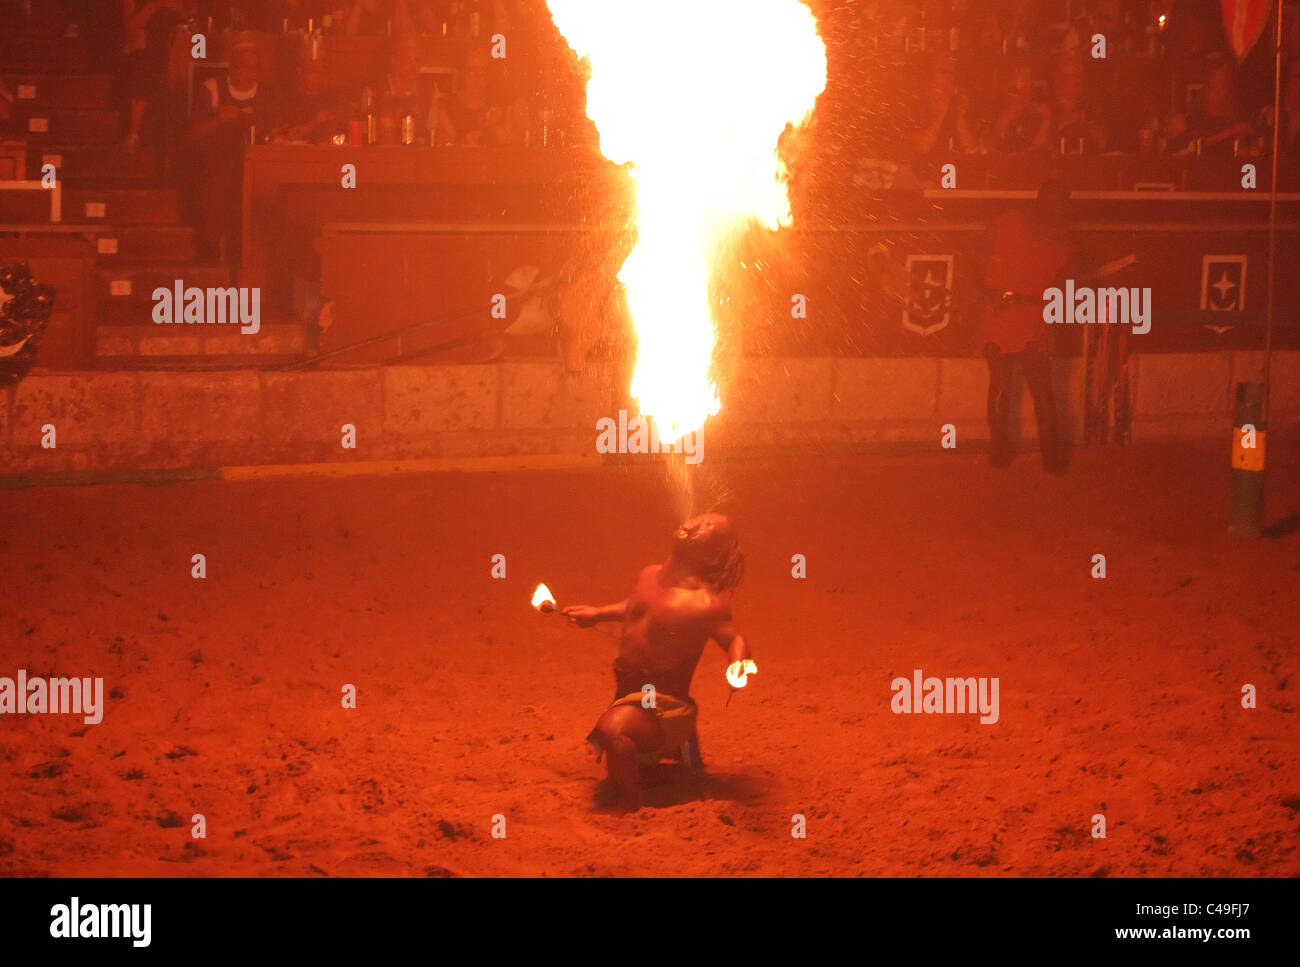 Fire juggler performs during Medieval Knight Show at the San Miguel Castle,  Tenerife island, Spain Stock Photo